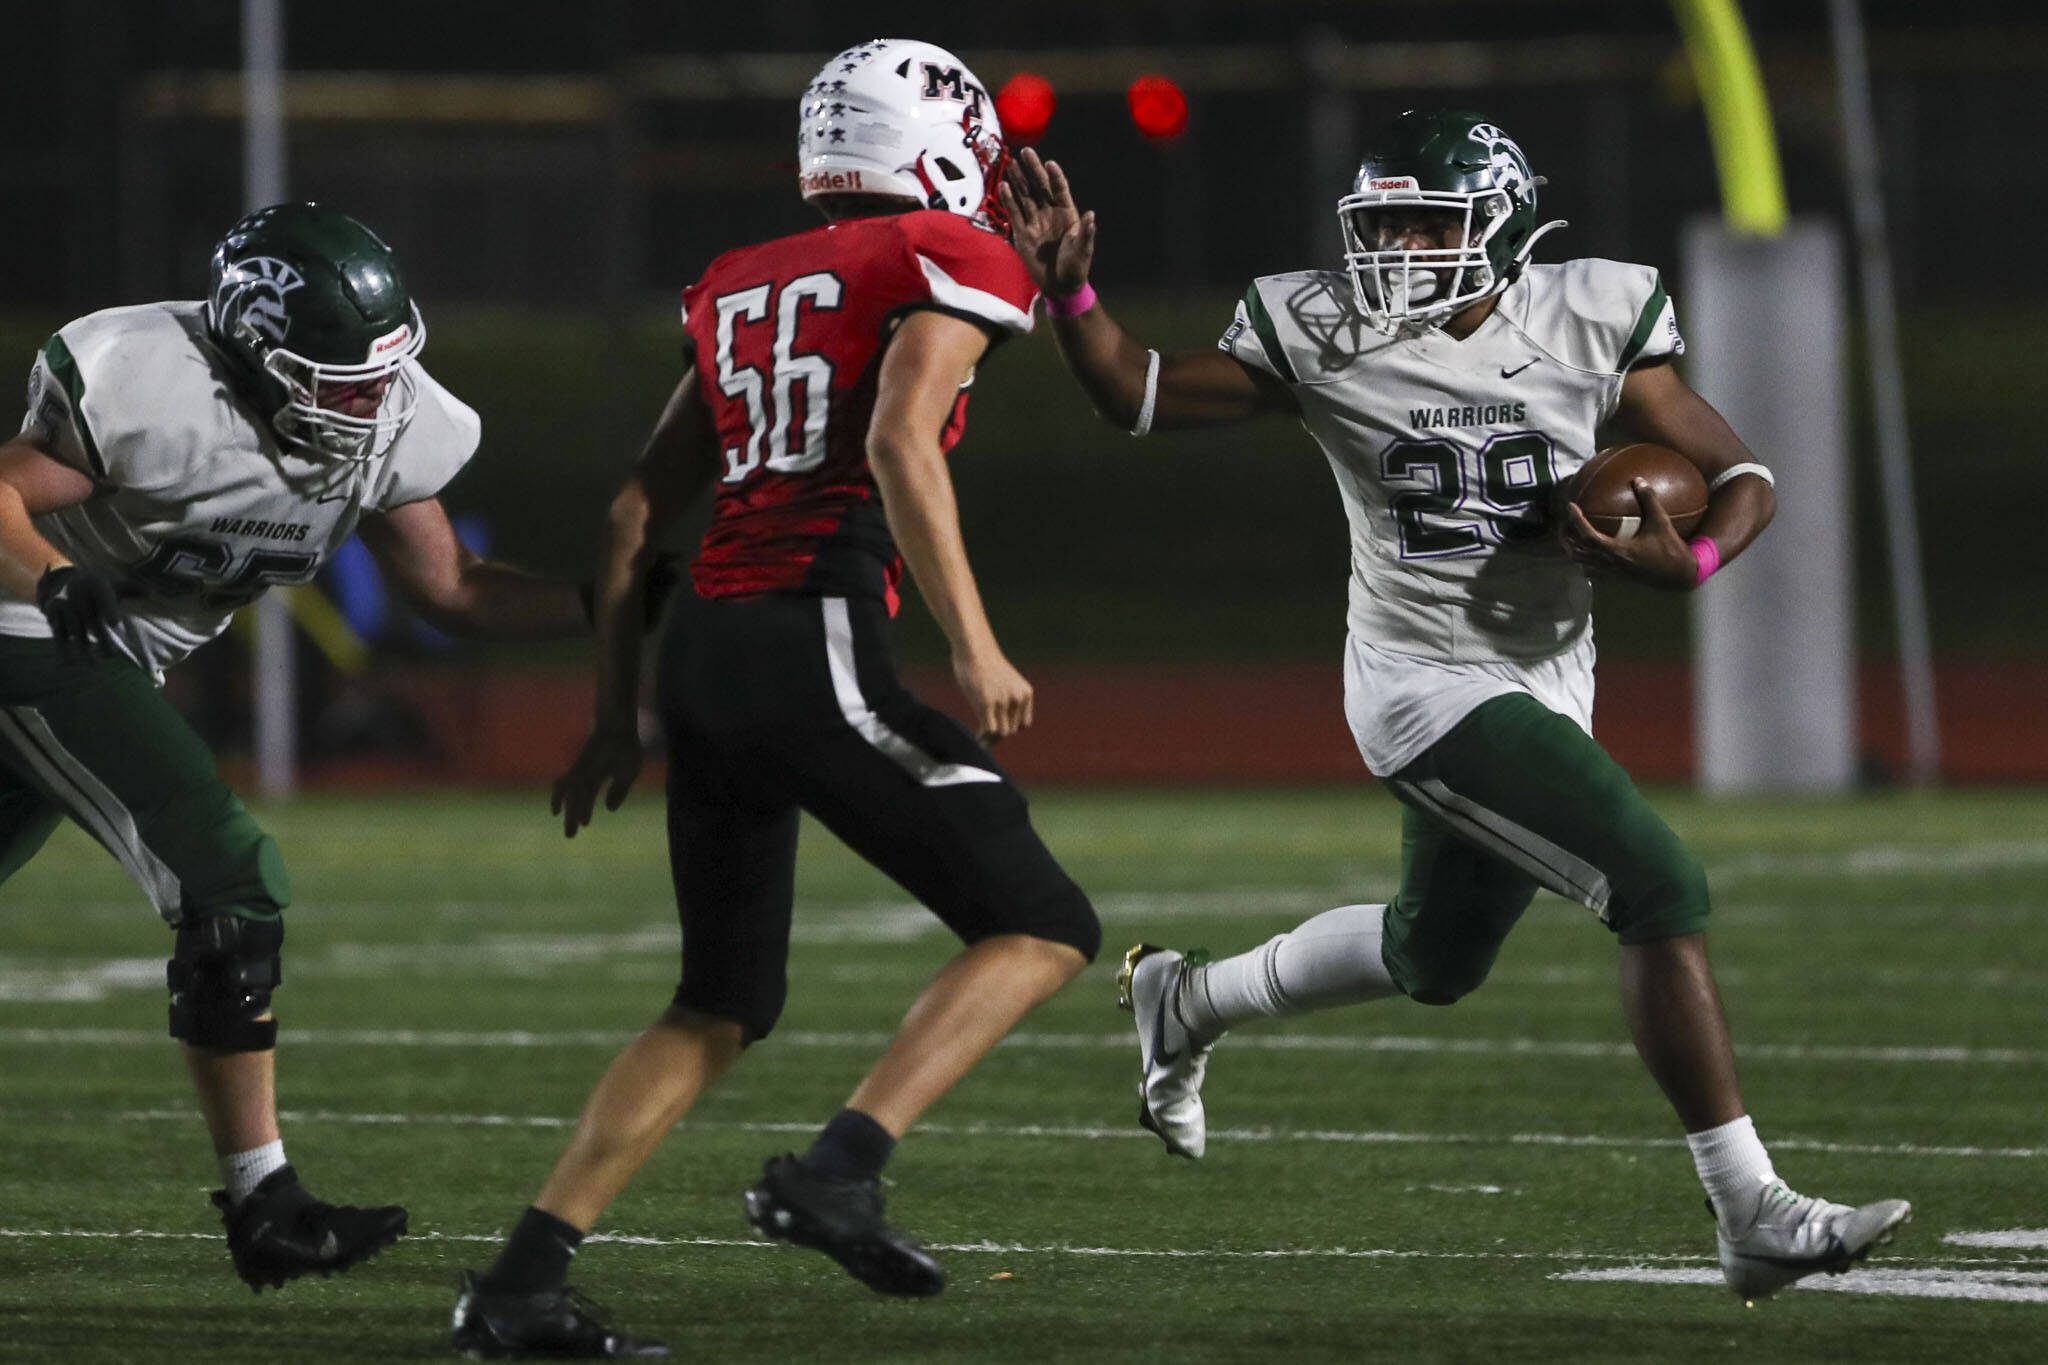 Edmonds-Woodway’s Rashaad Gerona-Chatters (29) moves with the ball during a game between Edmonds-Woodway and Mountlake Terrace at Edmonds-Woodway Stadium in Edmonds, Washington on Friday, Oct. 20, 2023. Edmonds-Woodway won, 13-10. (Annie Barker / The Herald)